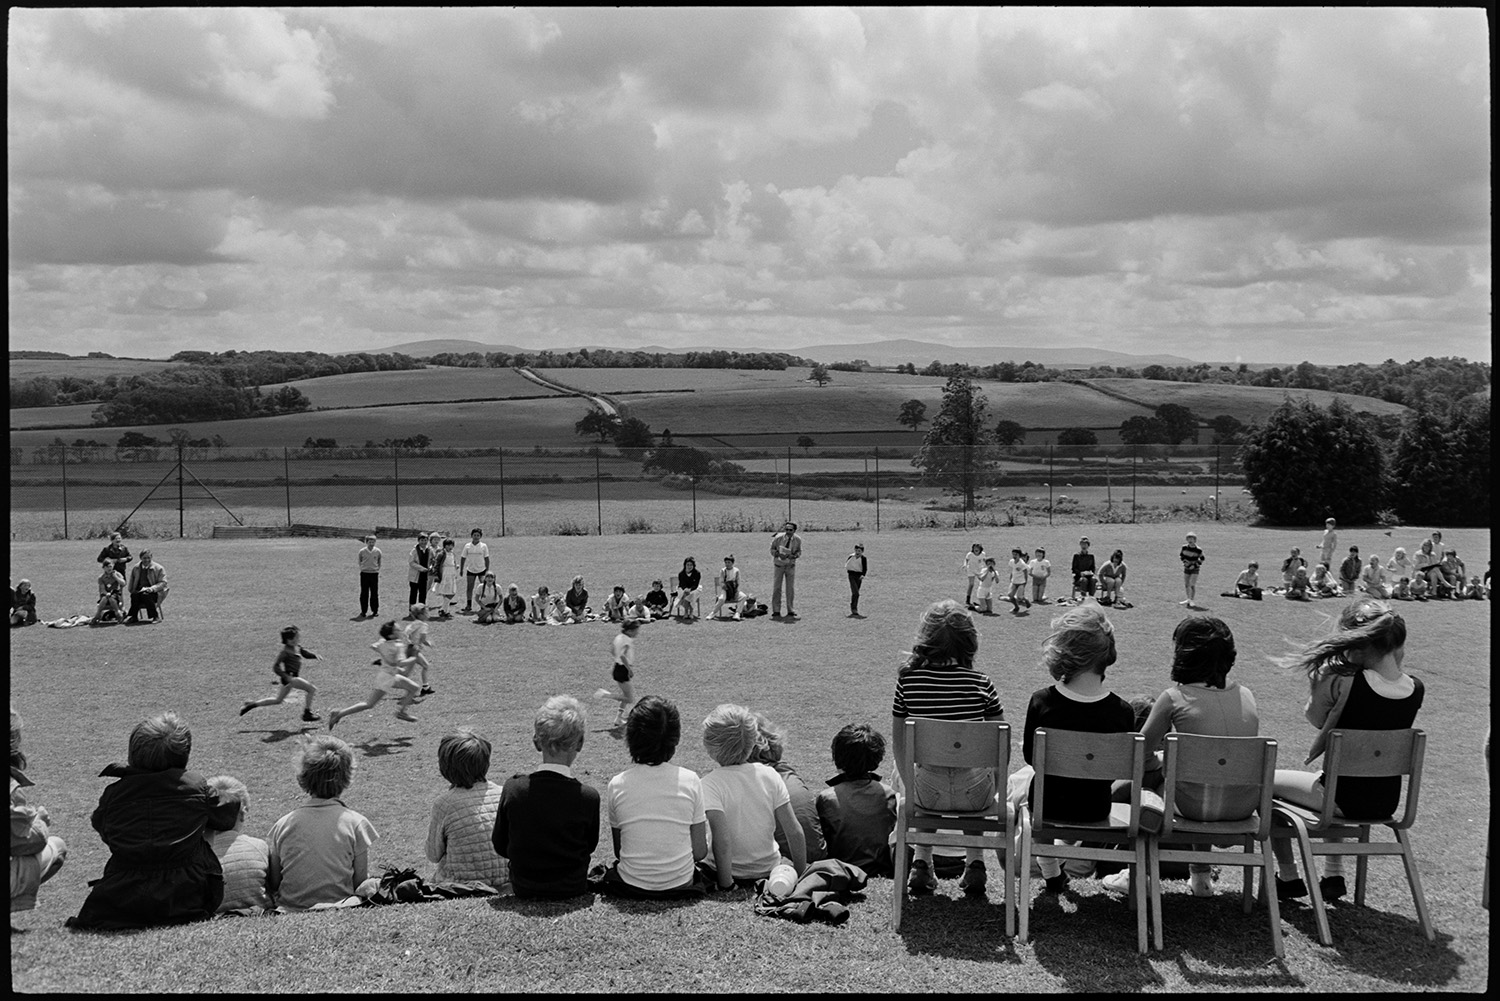 School sports day, children, races and spectators. 
[Children taking part in a running race on the school field at Winkleigh School at a sports day where children from Black Torrington School, Northlew School, Dolton School and Highampton School were competing. Other children and teachers are watching them from the side of the track. Some of the children in the foreground are sat on chairs.]